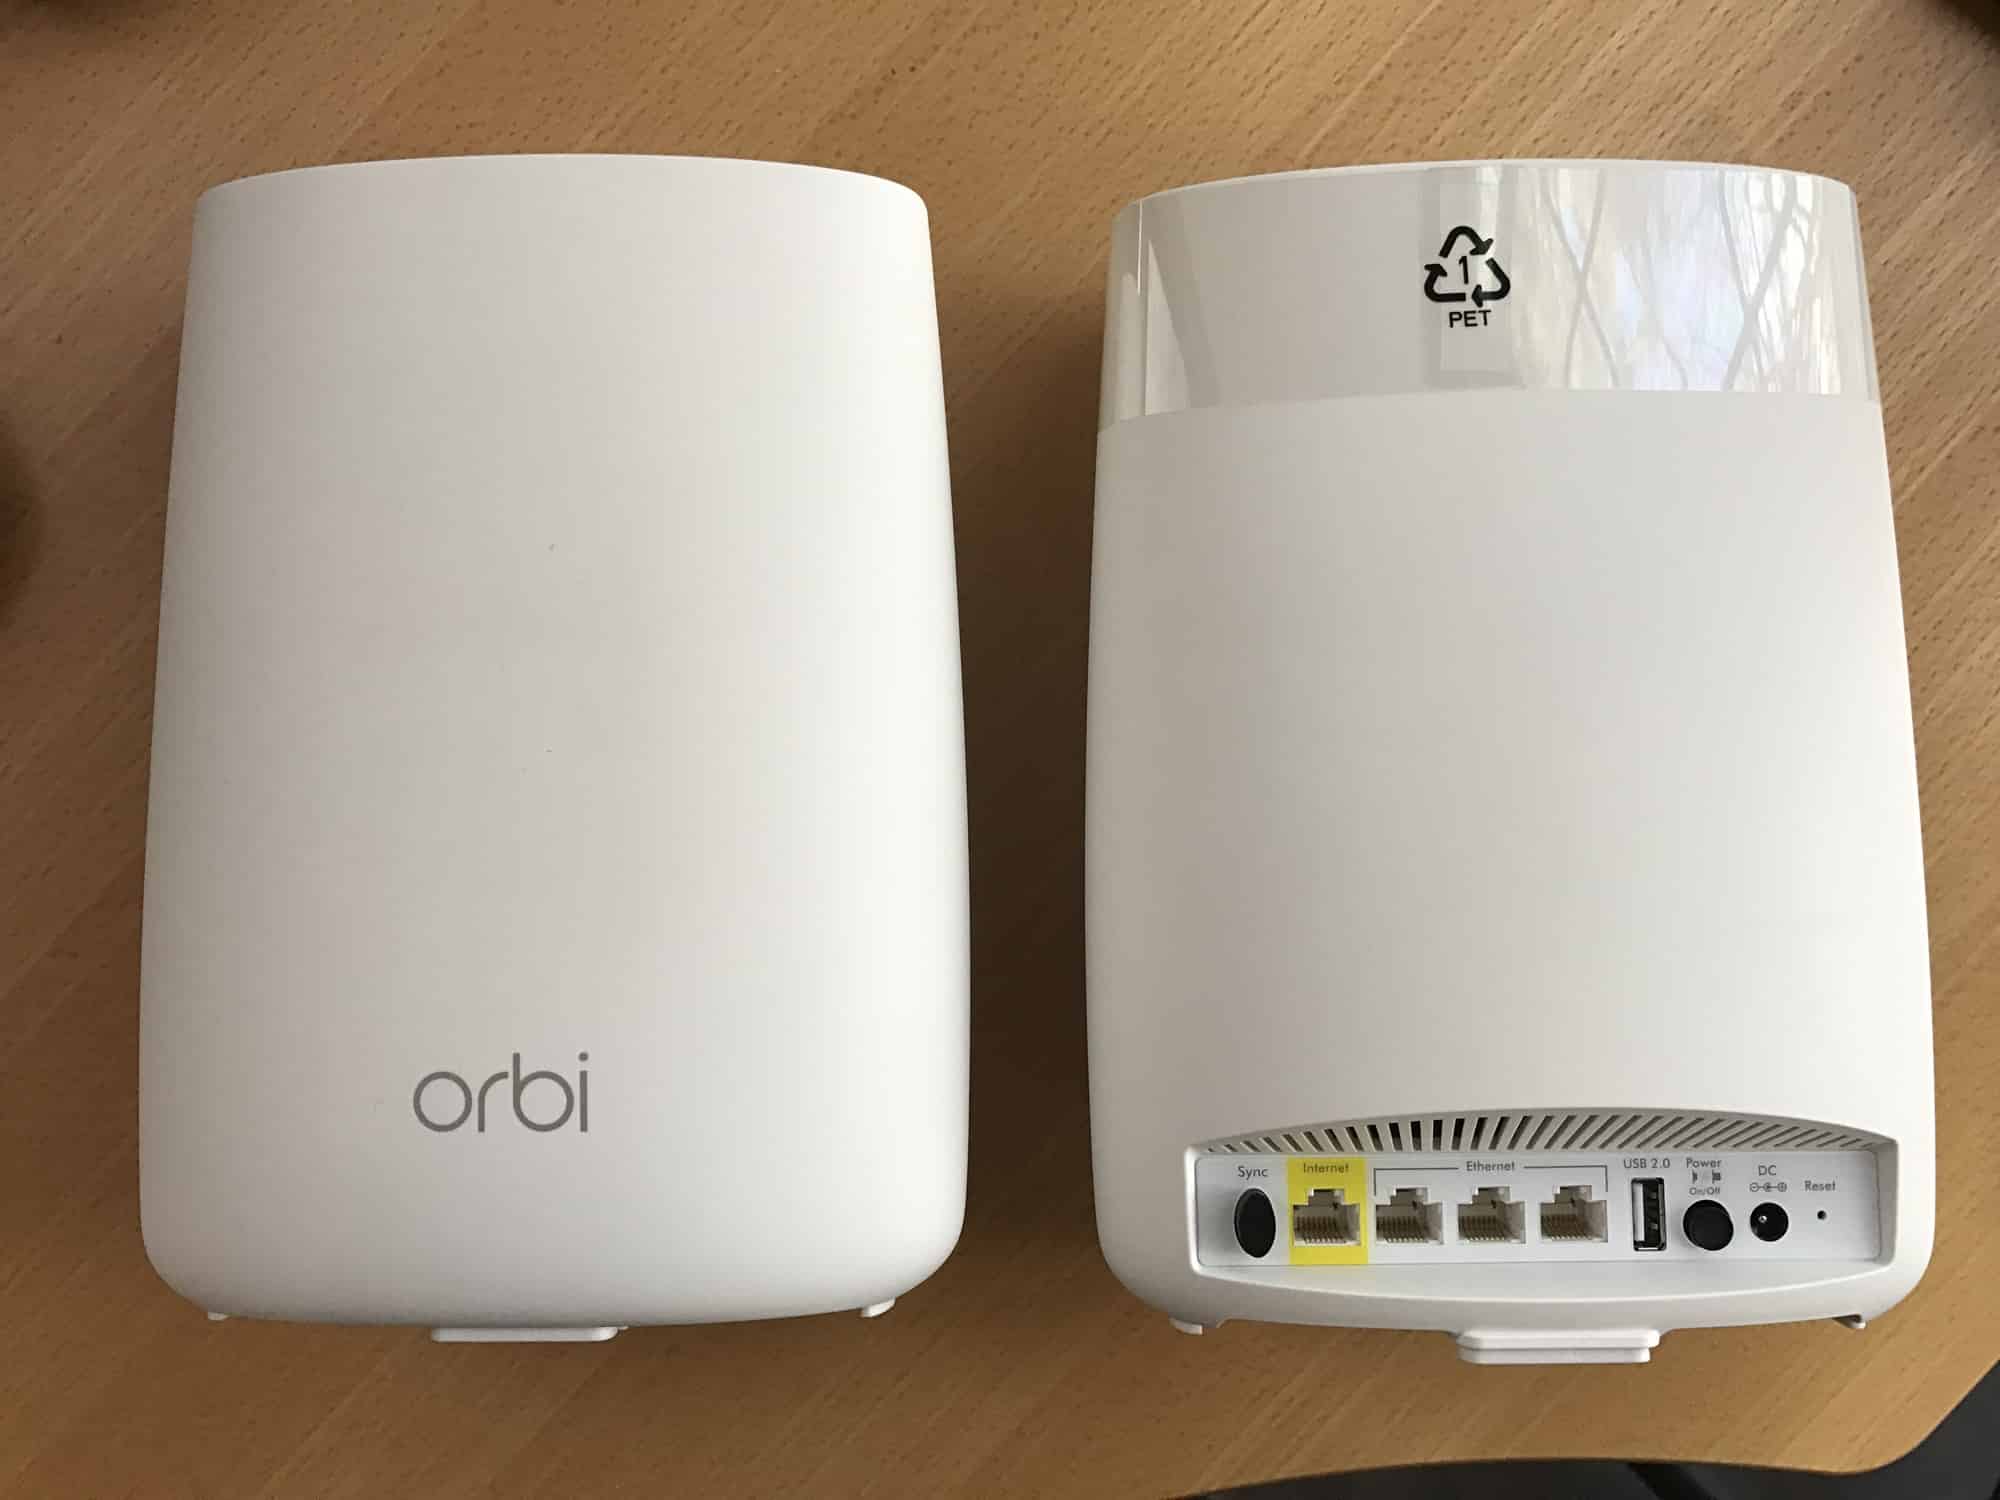 NETGEAR's Orbi has more ports than any other mesh Wi-Fi system we tested